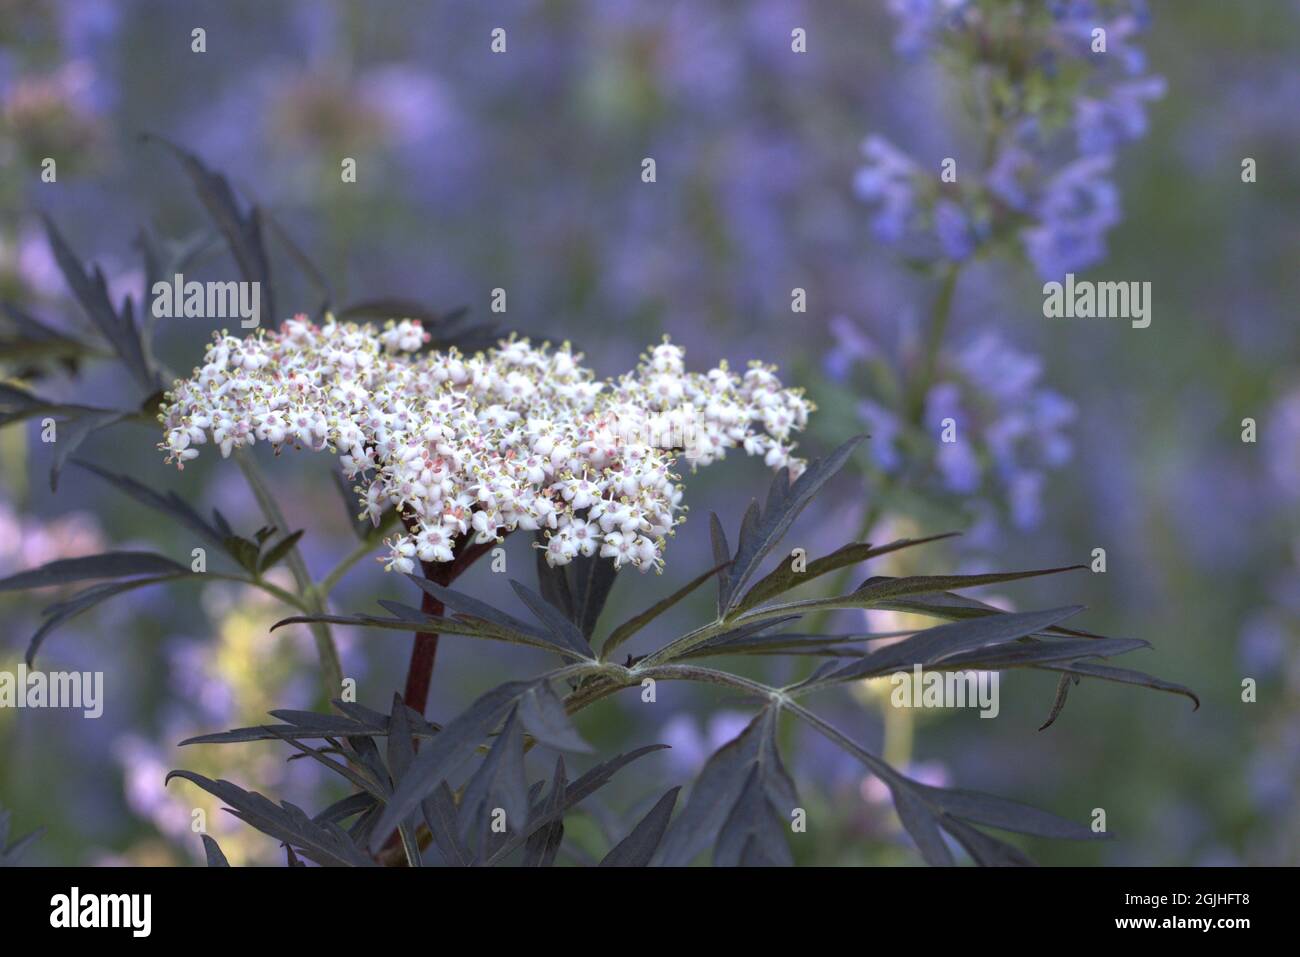 close-up of a beautiful flower of sambucus nigra against a grey-blue blurred background Stock Photo